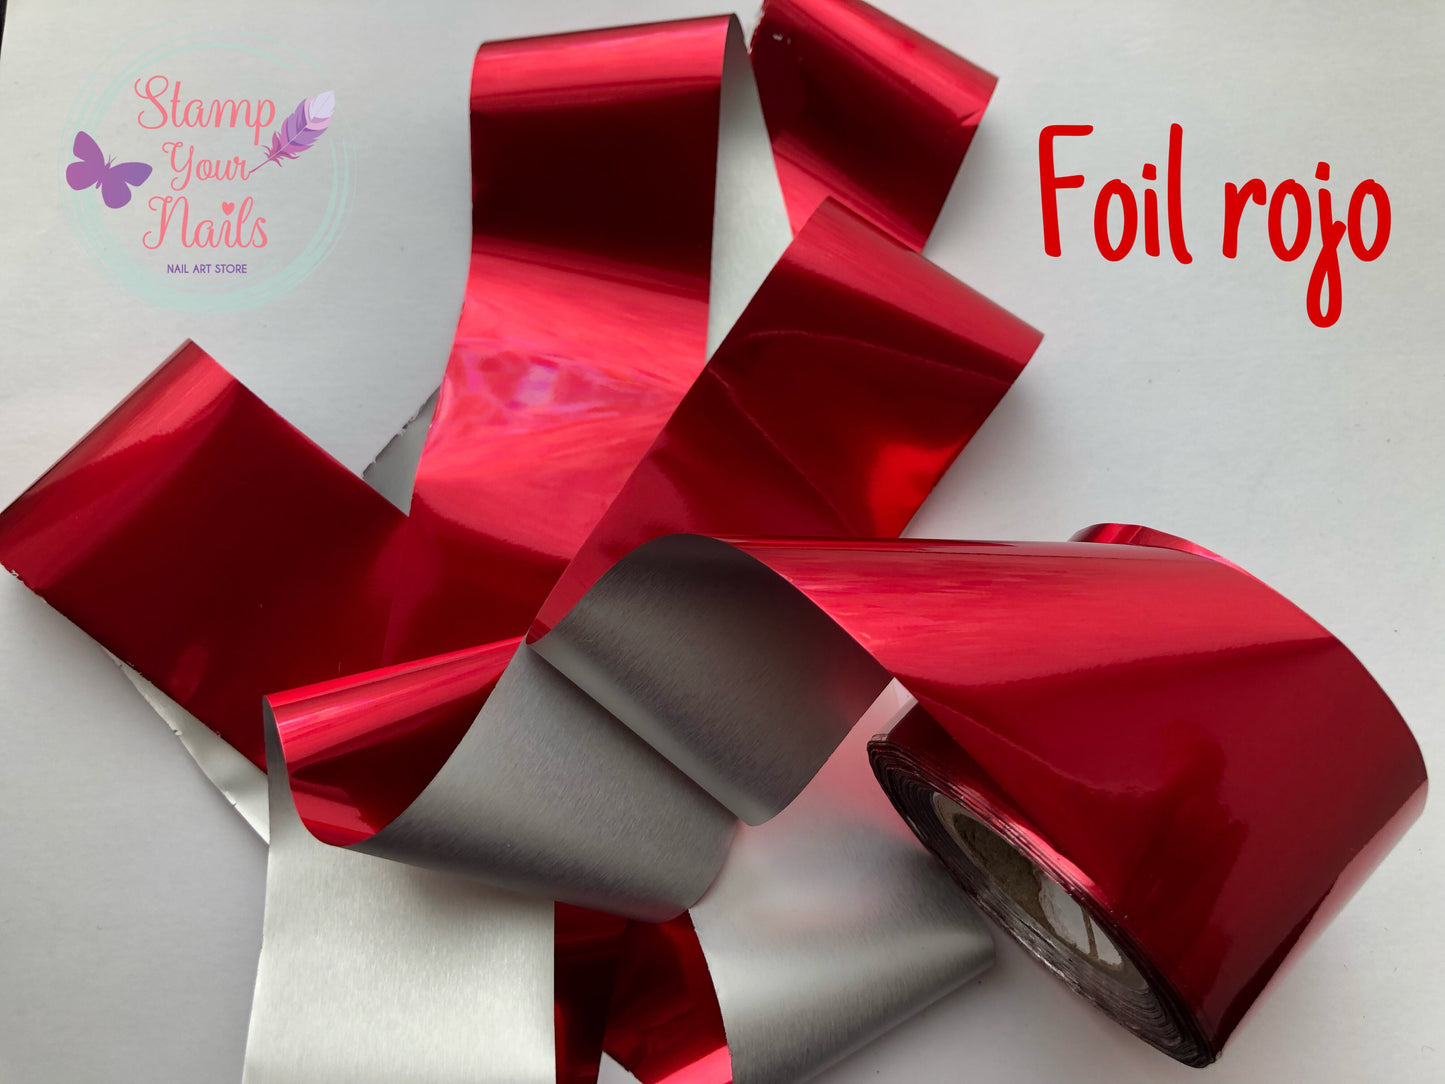 Foil rojo - Stamp your nails